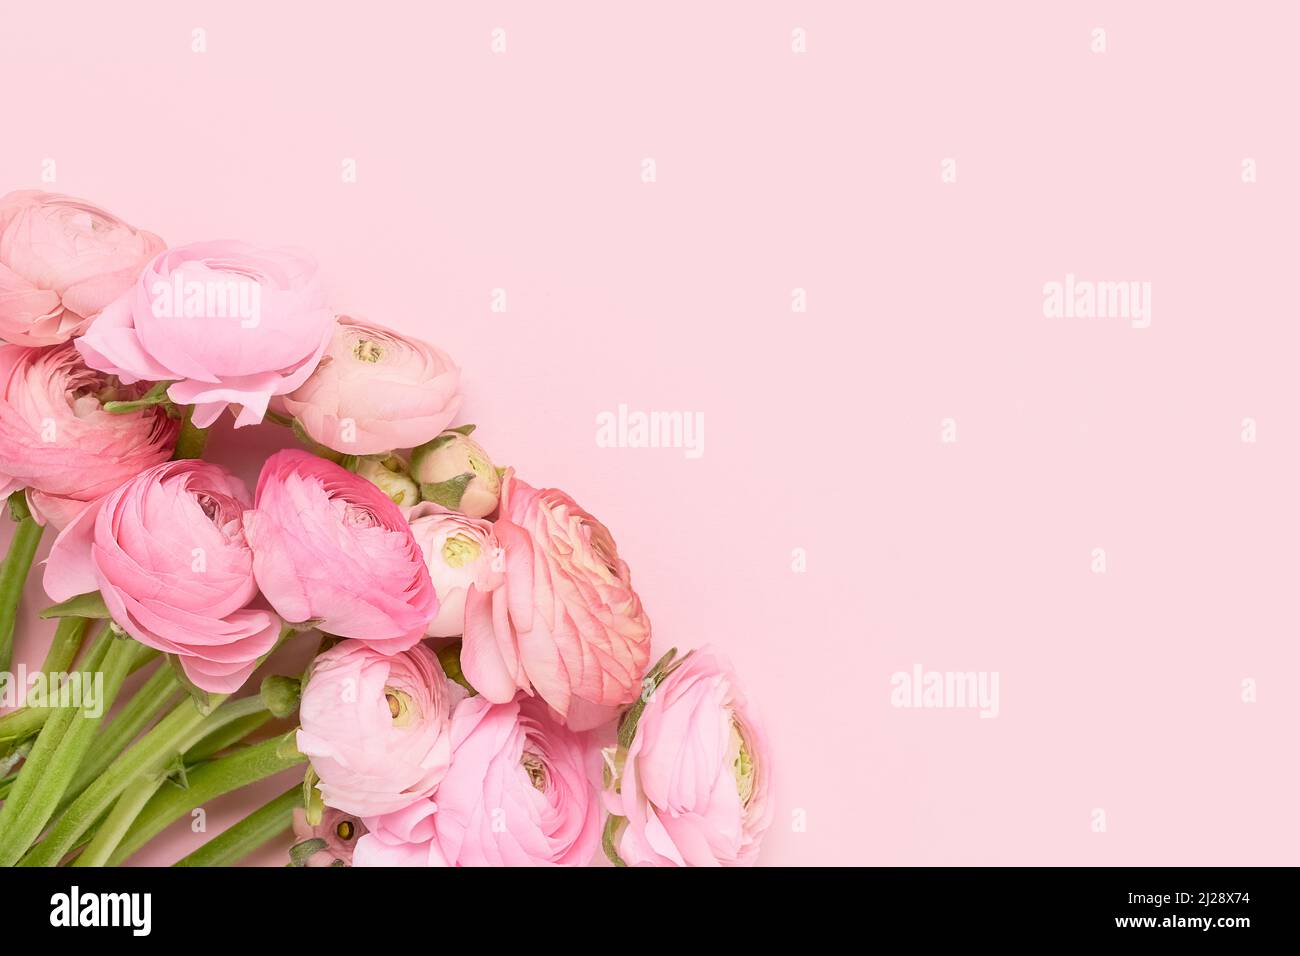 Pink ranunculus flowers bunch on a pink background. Mothers Day, Valentines Day, birthday concept. Top view, copy space for text Stock Photo